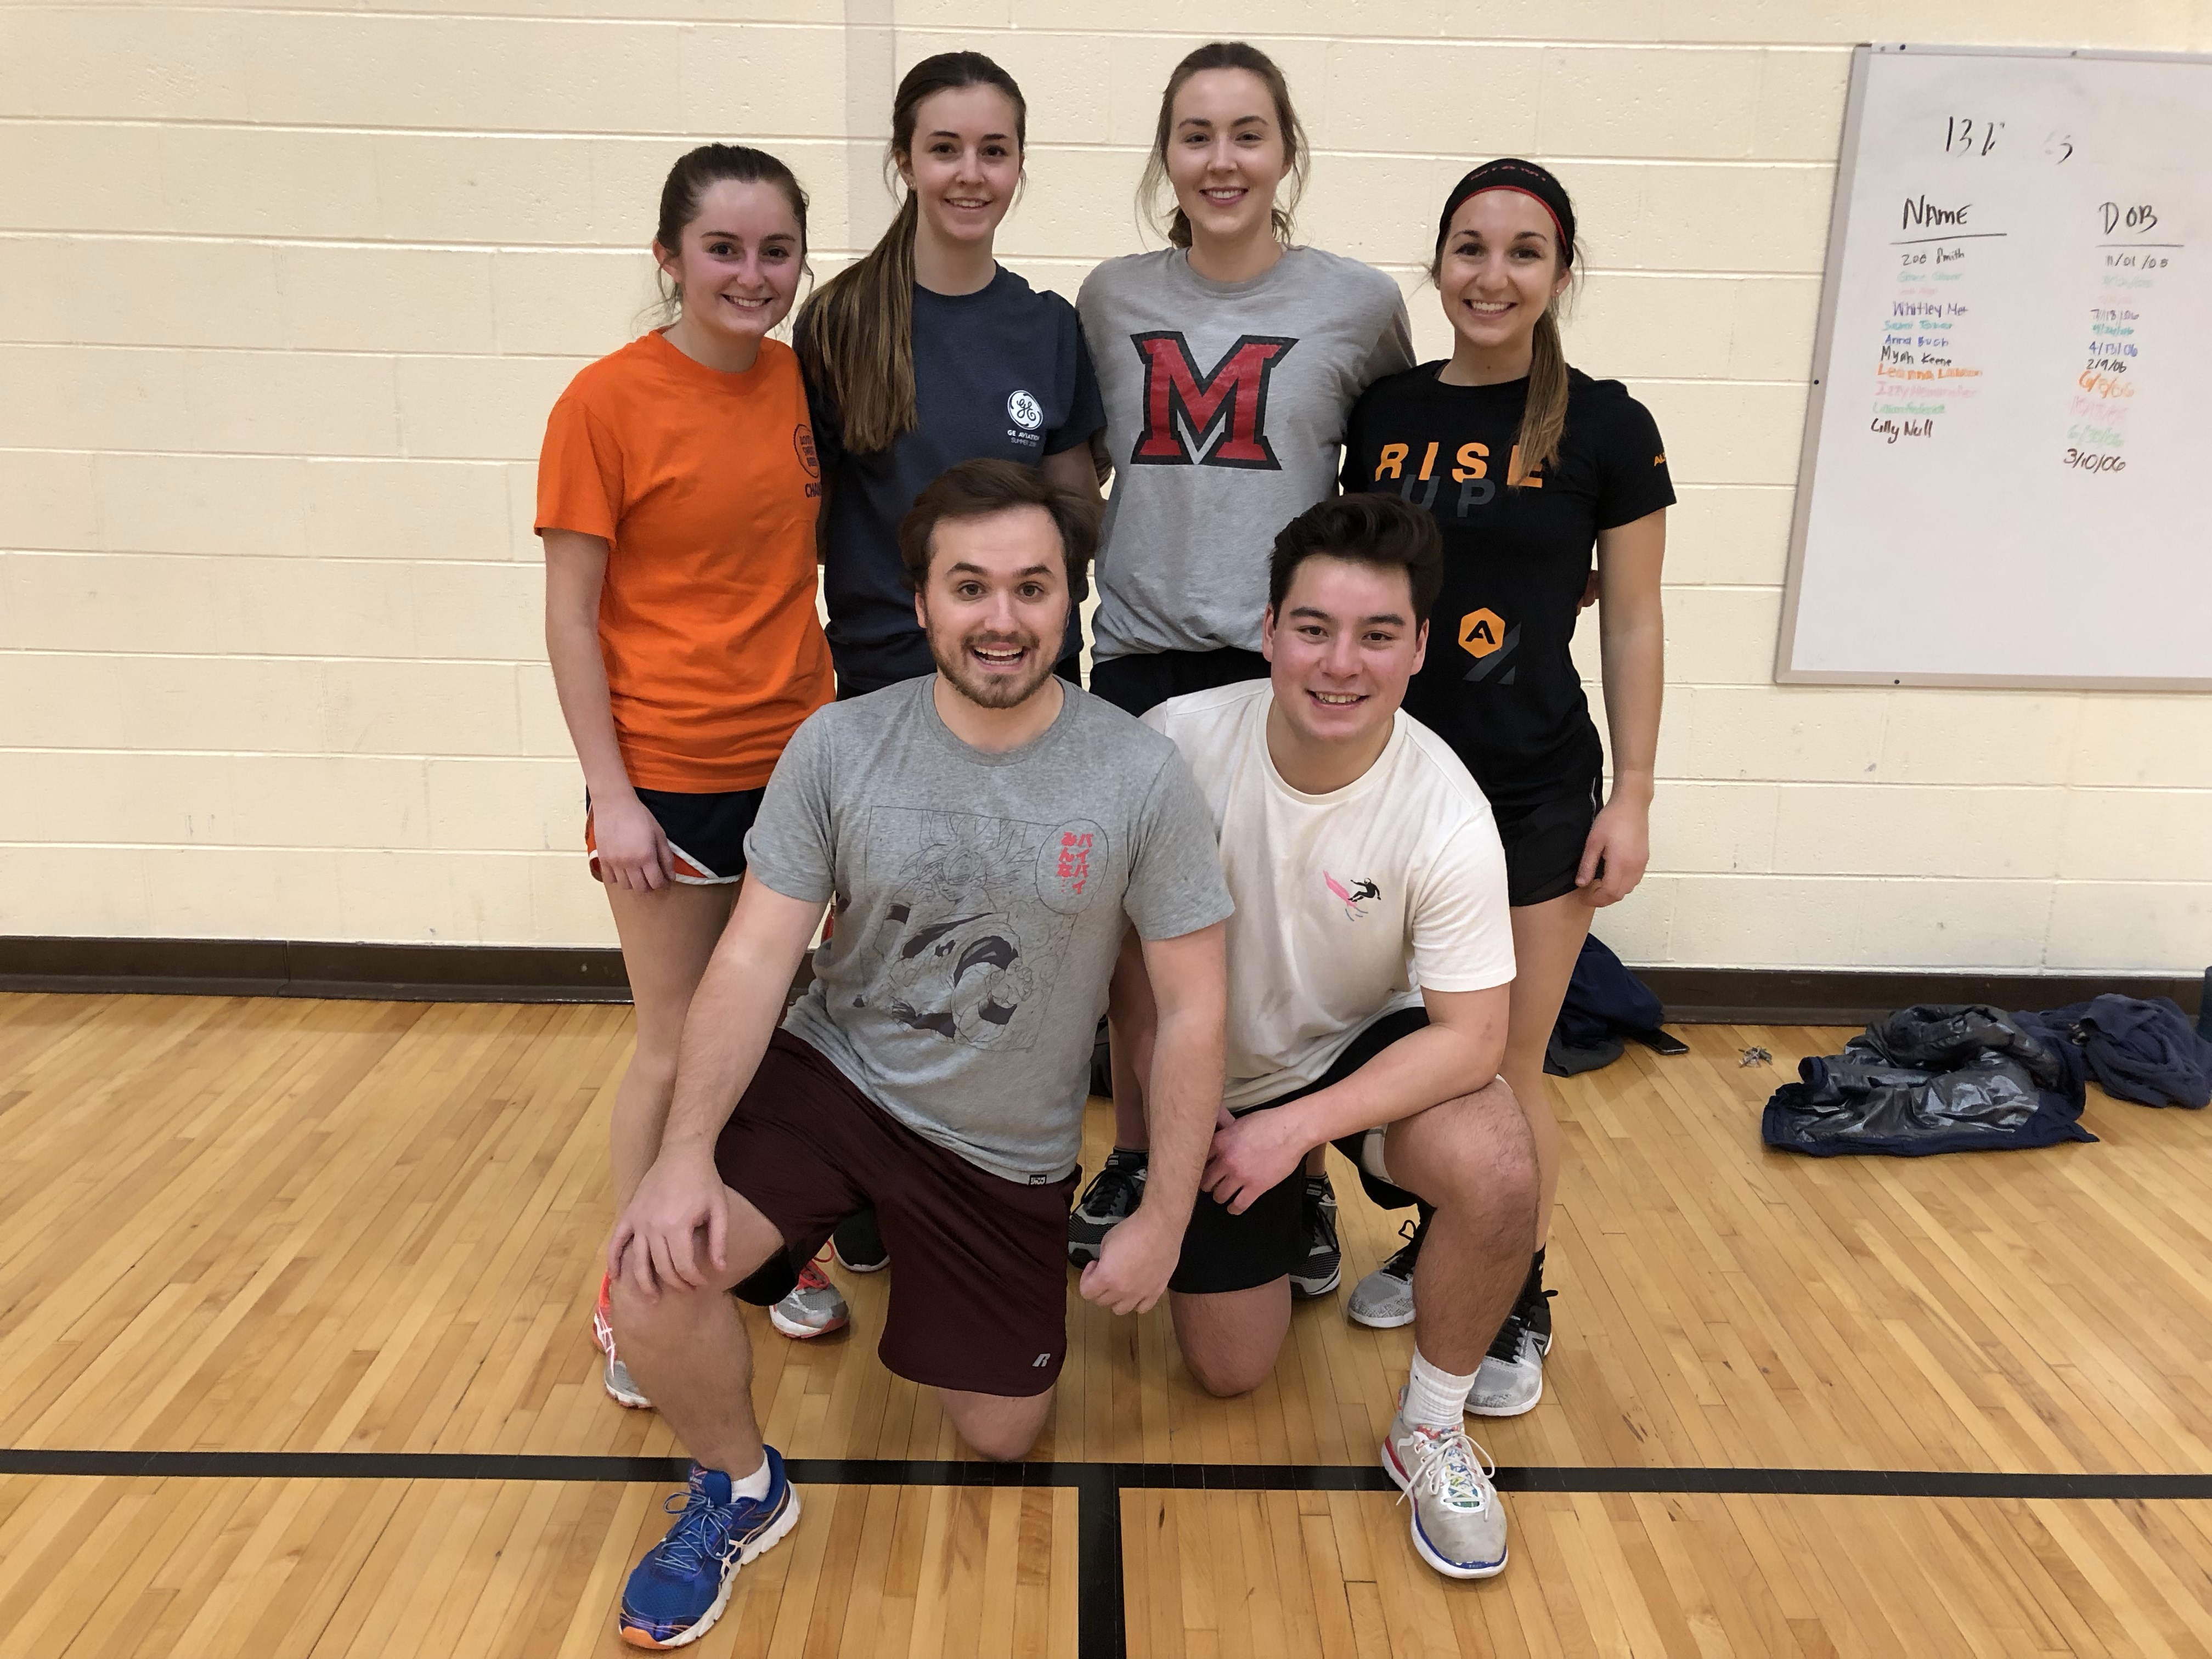 Indoor Co-Rec Volleyball runner up team poses on the court.